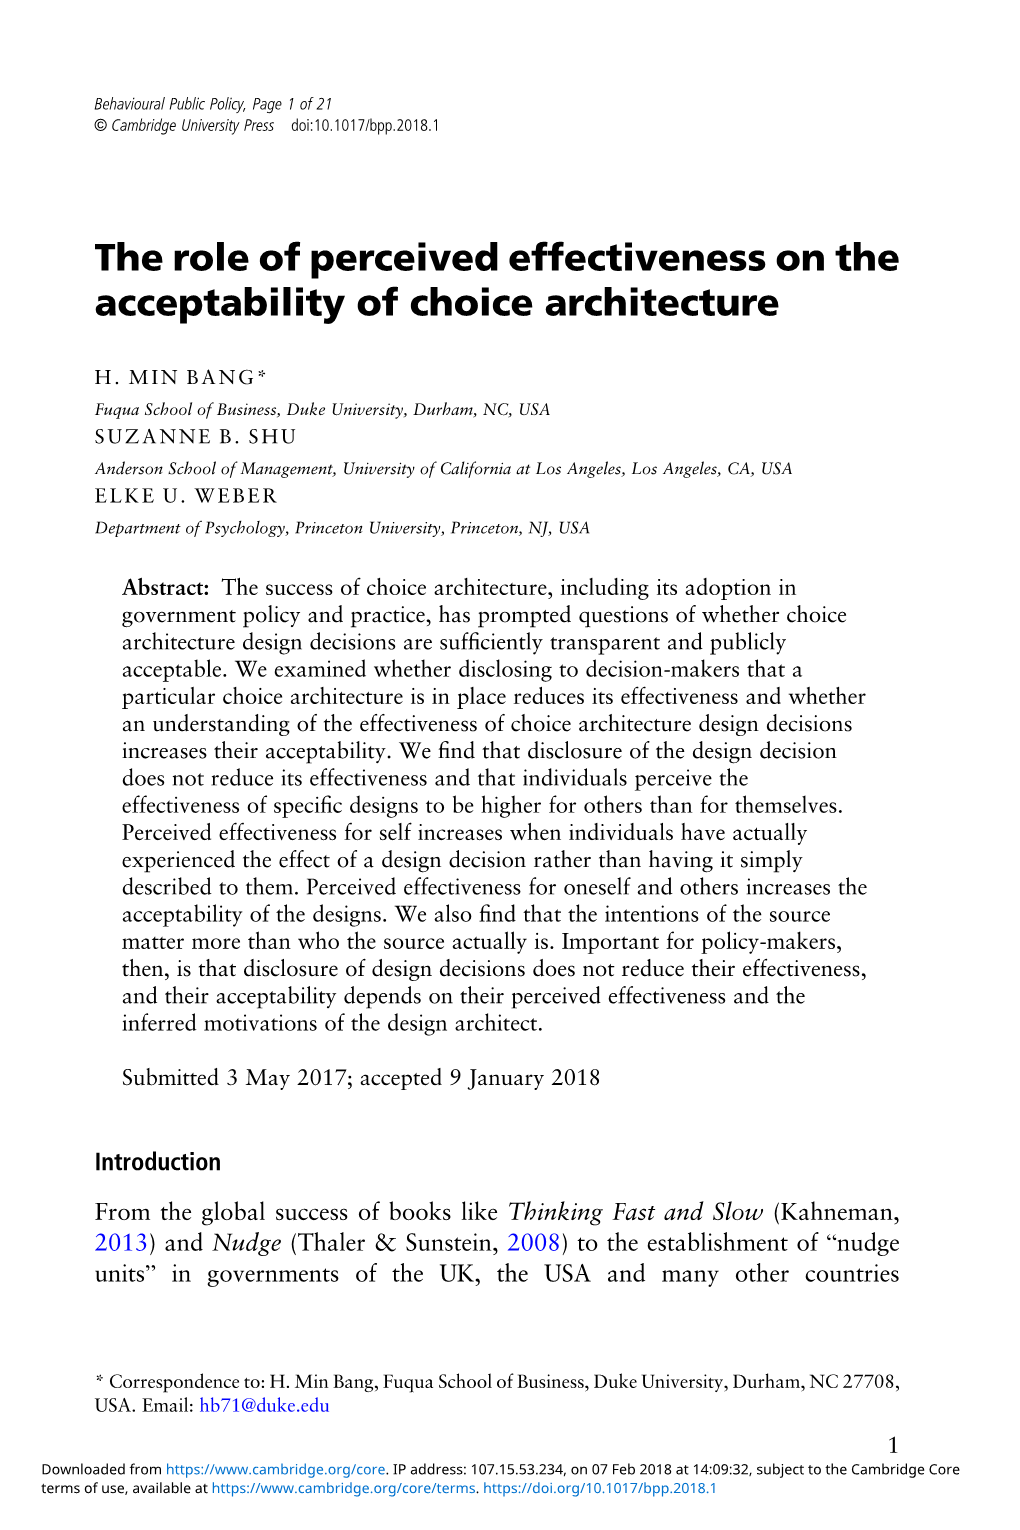 The Role of Perceived Effectiveness on the Acceptability of Choice Architecture